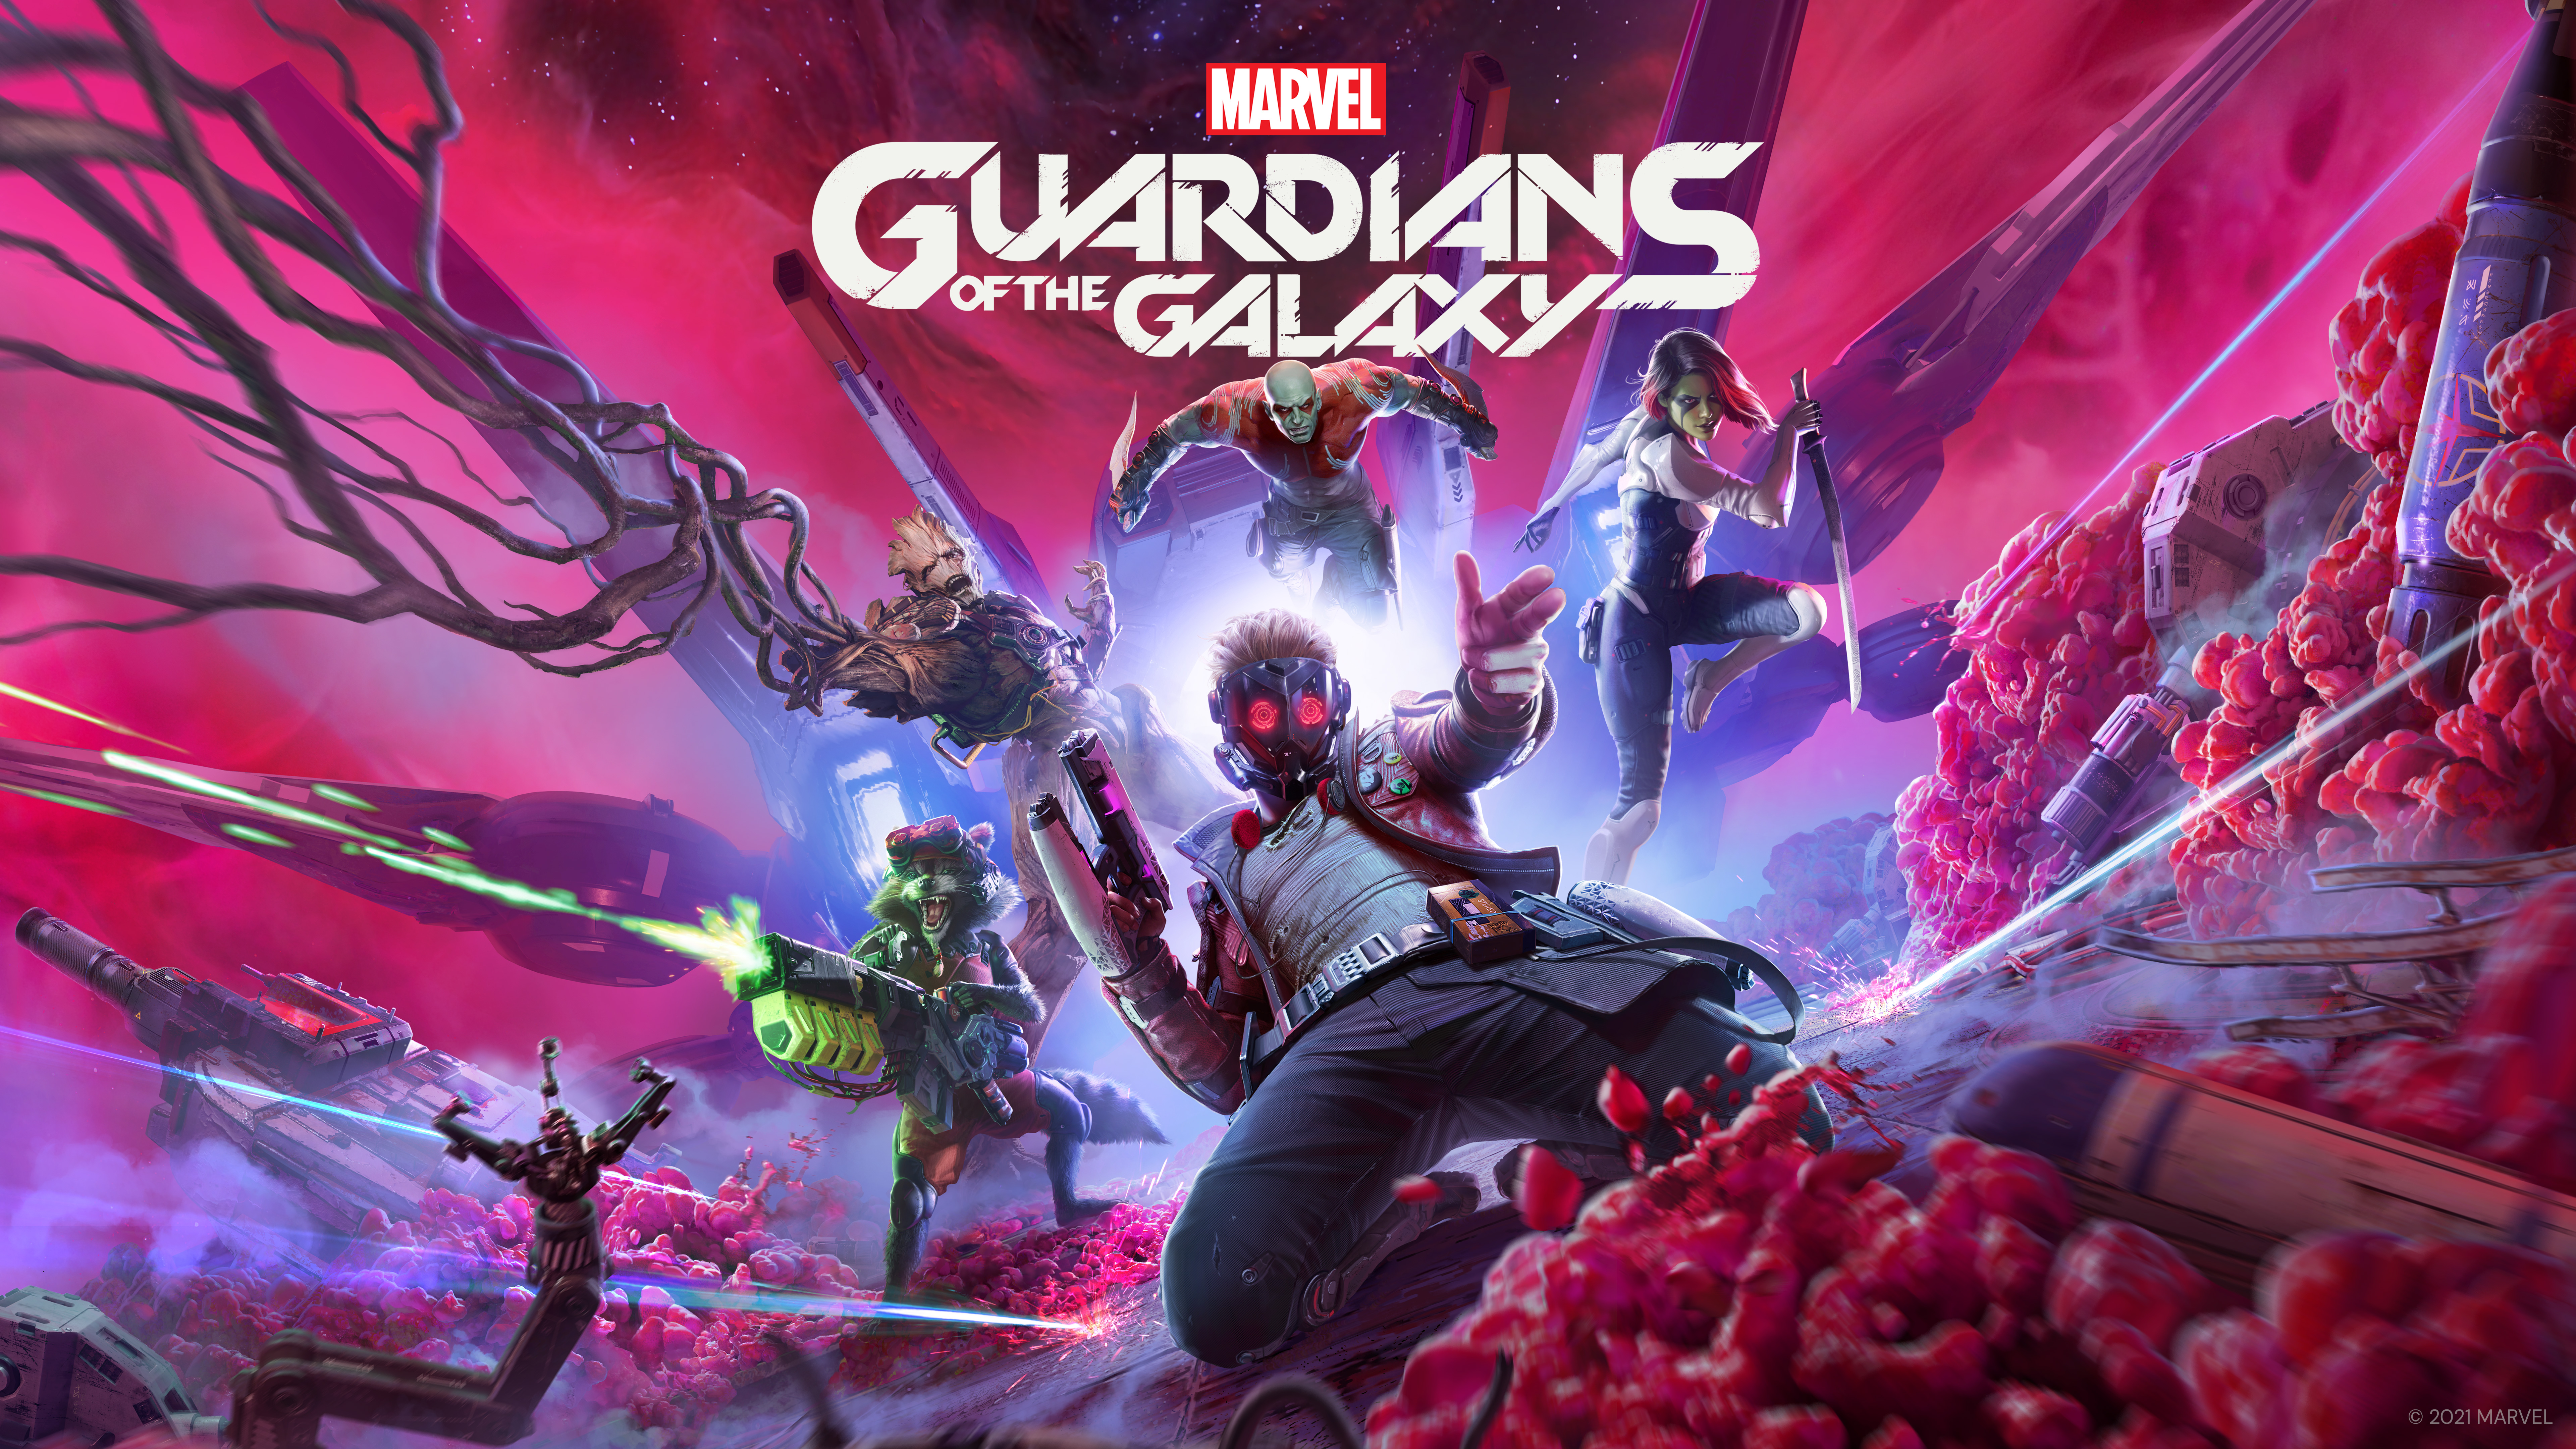 Guardians Of The Galaxy Game Marvel Comics Star Lord Gamora Drax The  Destroyer Groot Rocket Raccoon Wallpaper - Resolution:7680x4320 -  ID:1223845 